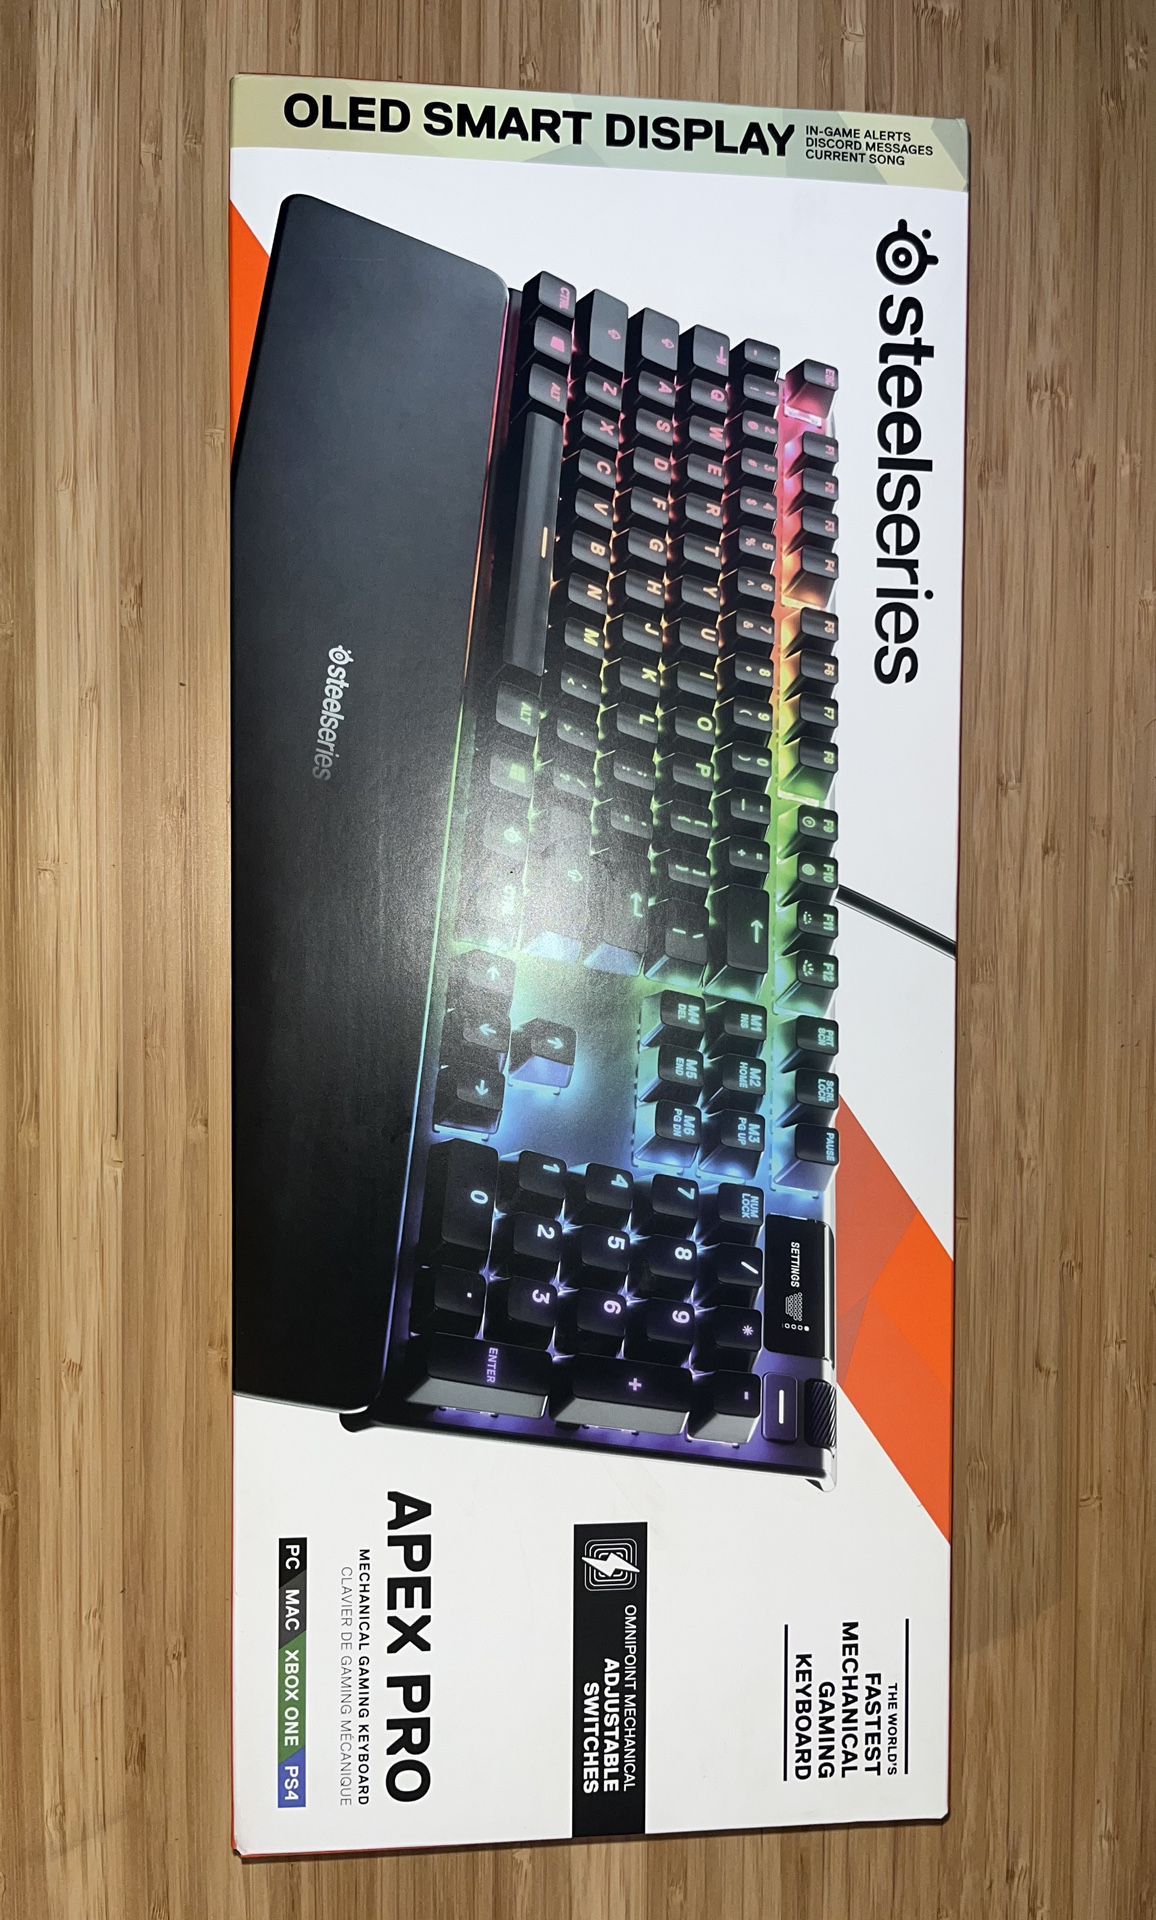 SteelSeries Apex Pro USB Mechanical Gaming Keyboard – Adjustable Actuation Switches – World’s Fastest Mechanical Keyboard – OLED Smart Display – RGB B